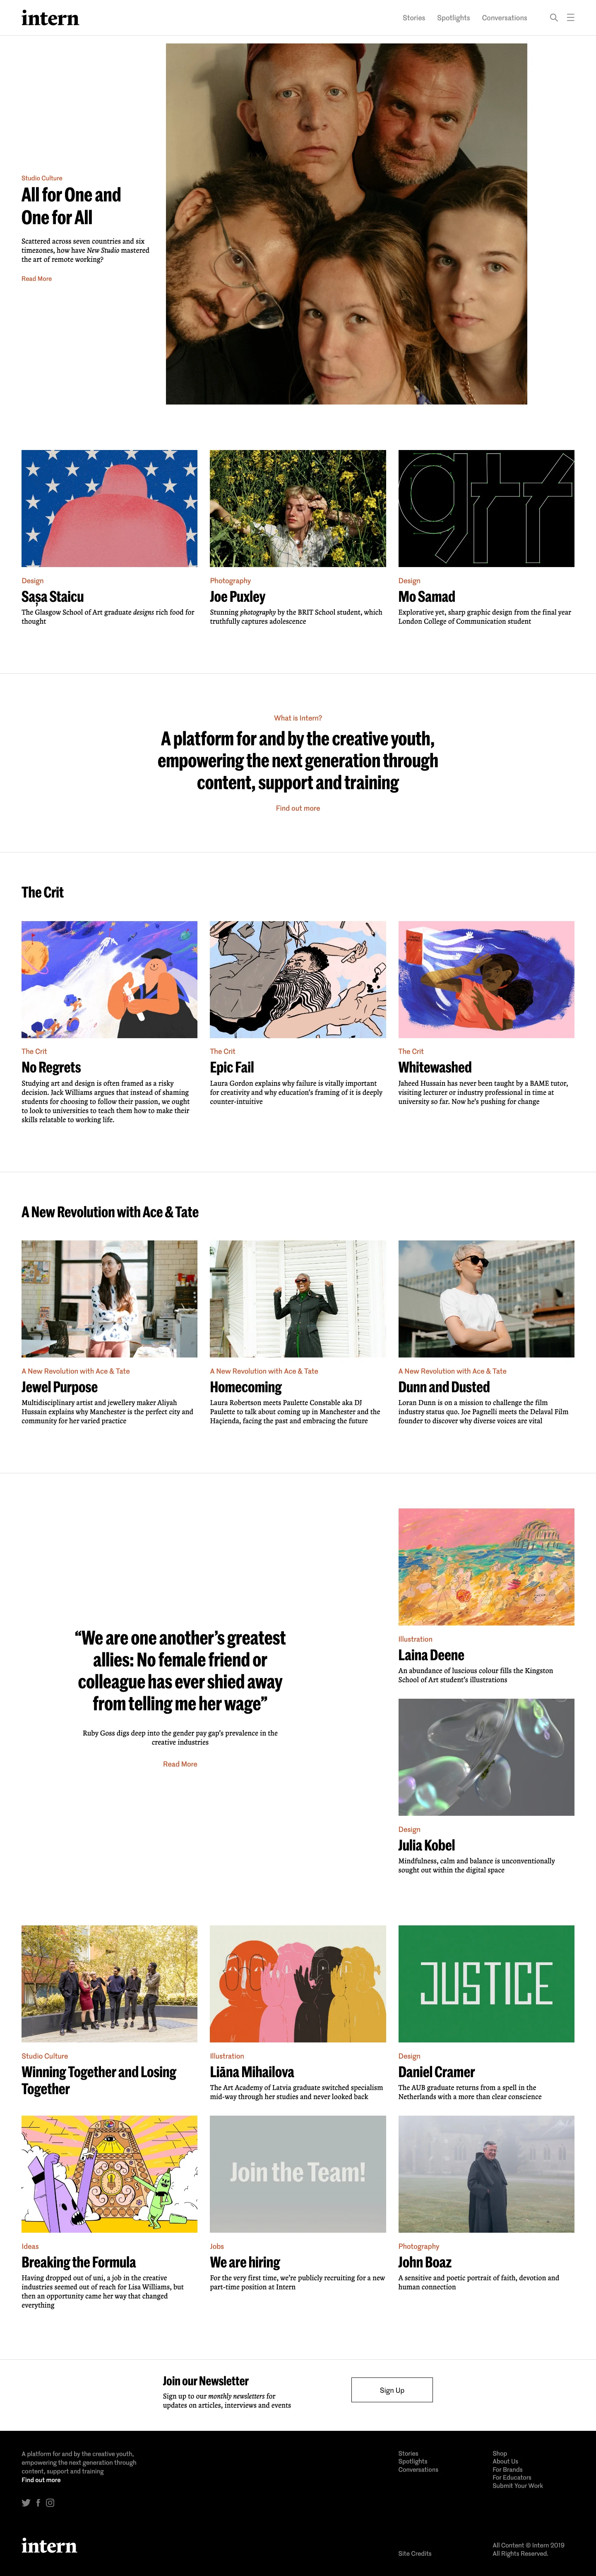 Intern Magazine Landing Page Example: A platform for and by the creative youth, empowering the next generation through content, support and training.